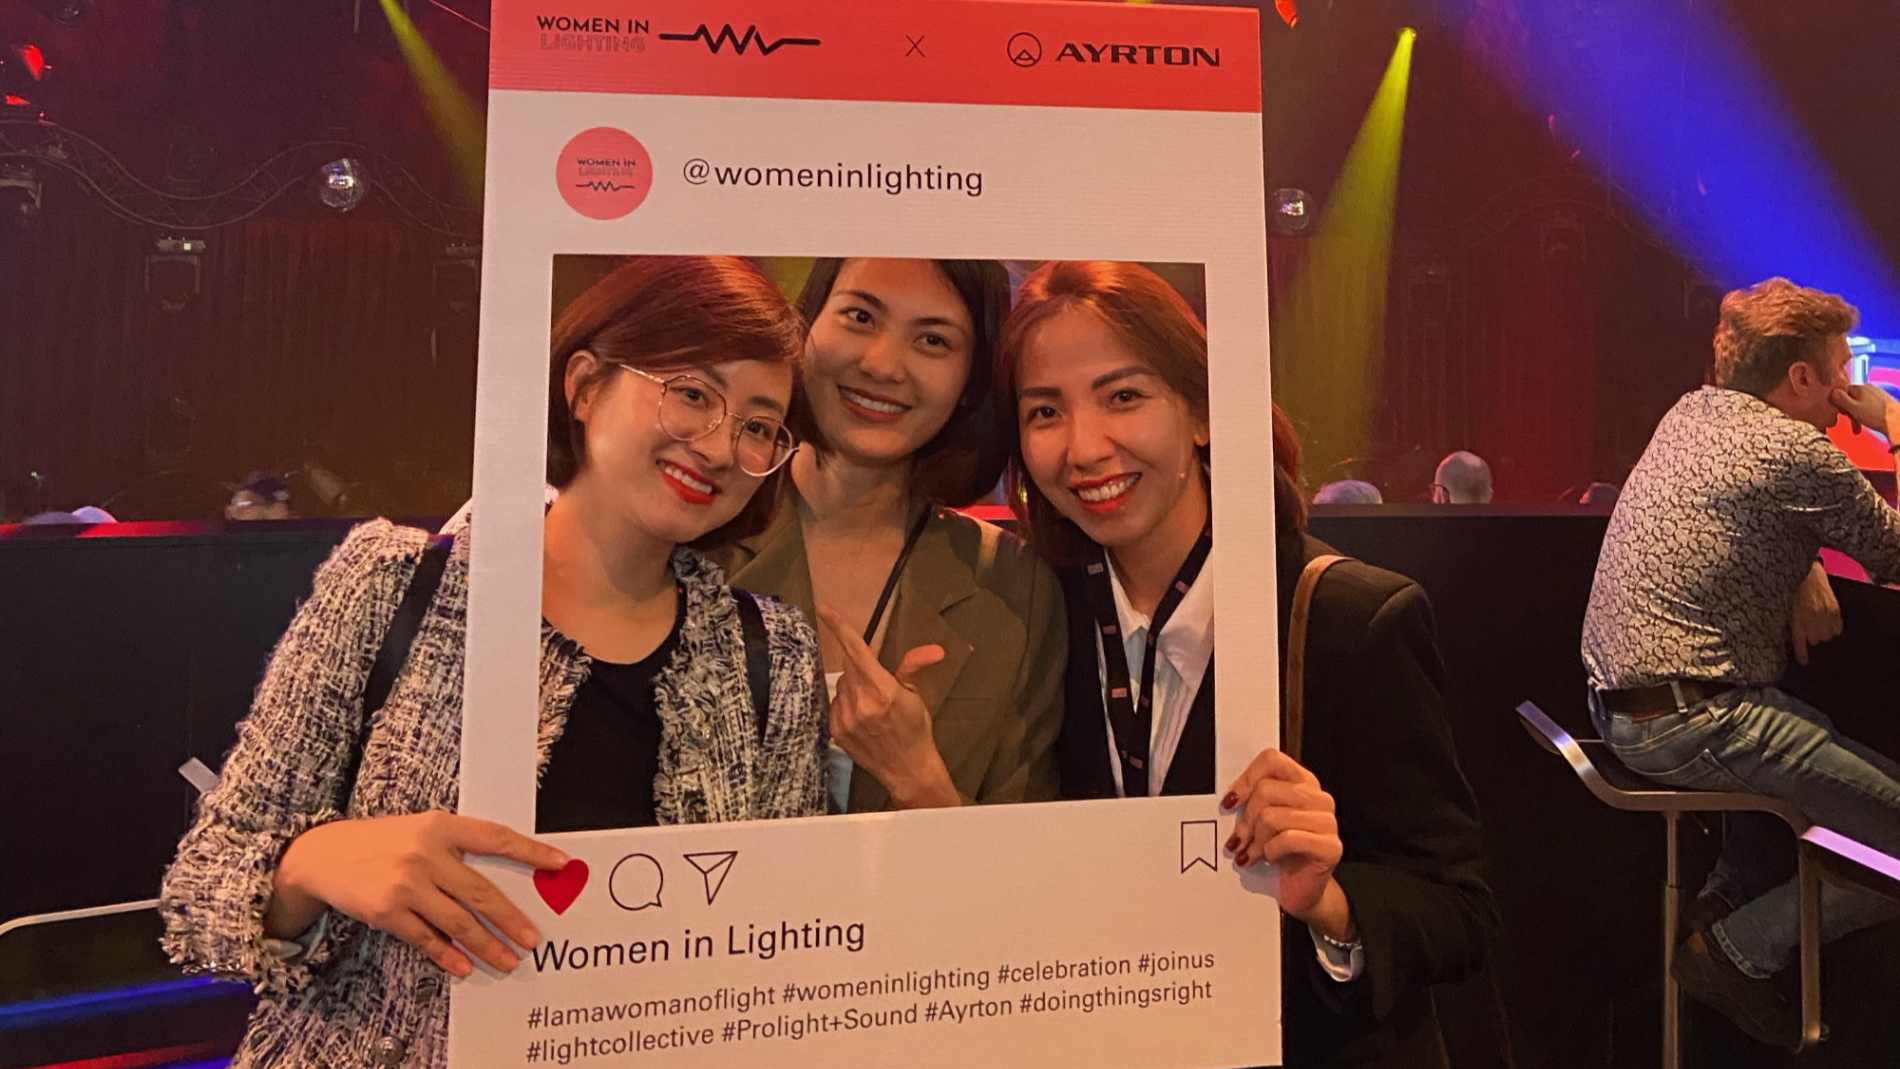 The “Women in Lighting” initiative raises the profile of female professionals in all lighting trades. (Source: Ayrton)